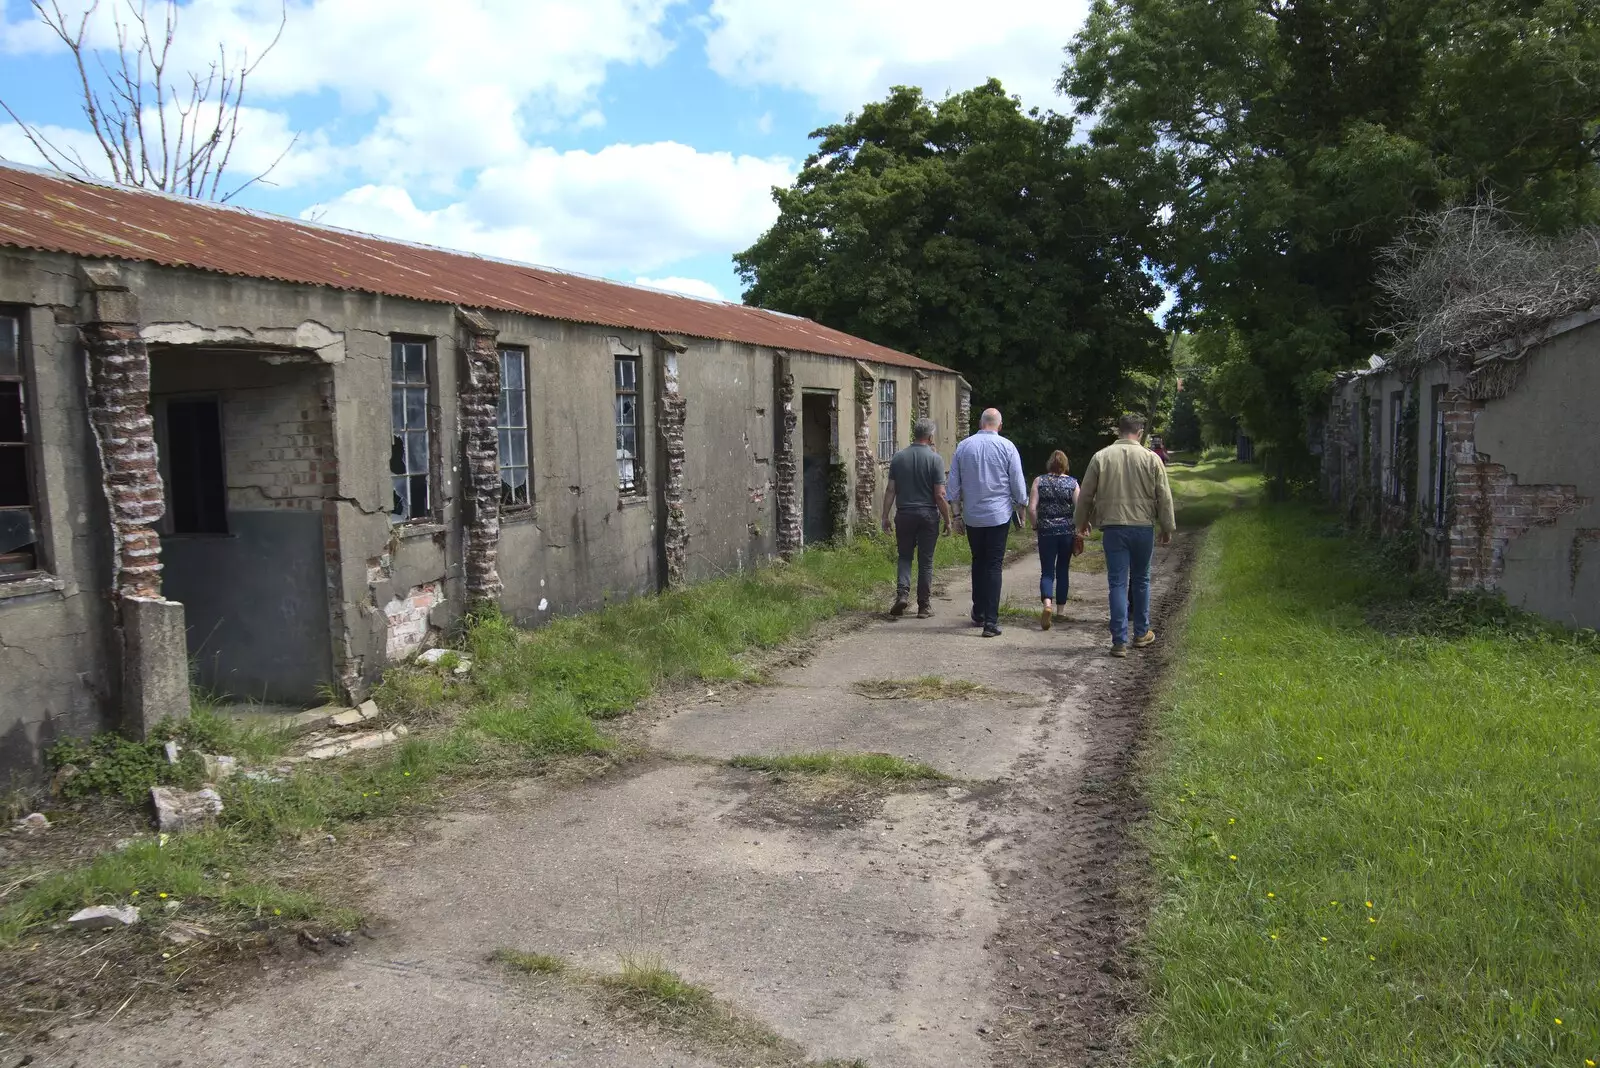 Exploring over, we head back to the house, from A 1940s Timewarp, Site 4, Bungay Airfield, Flixton, Suffolk - 9th June 2022